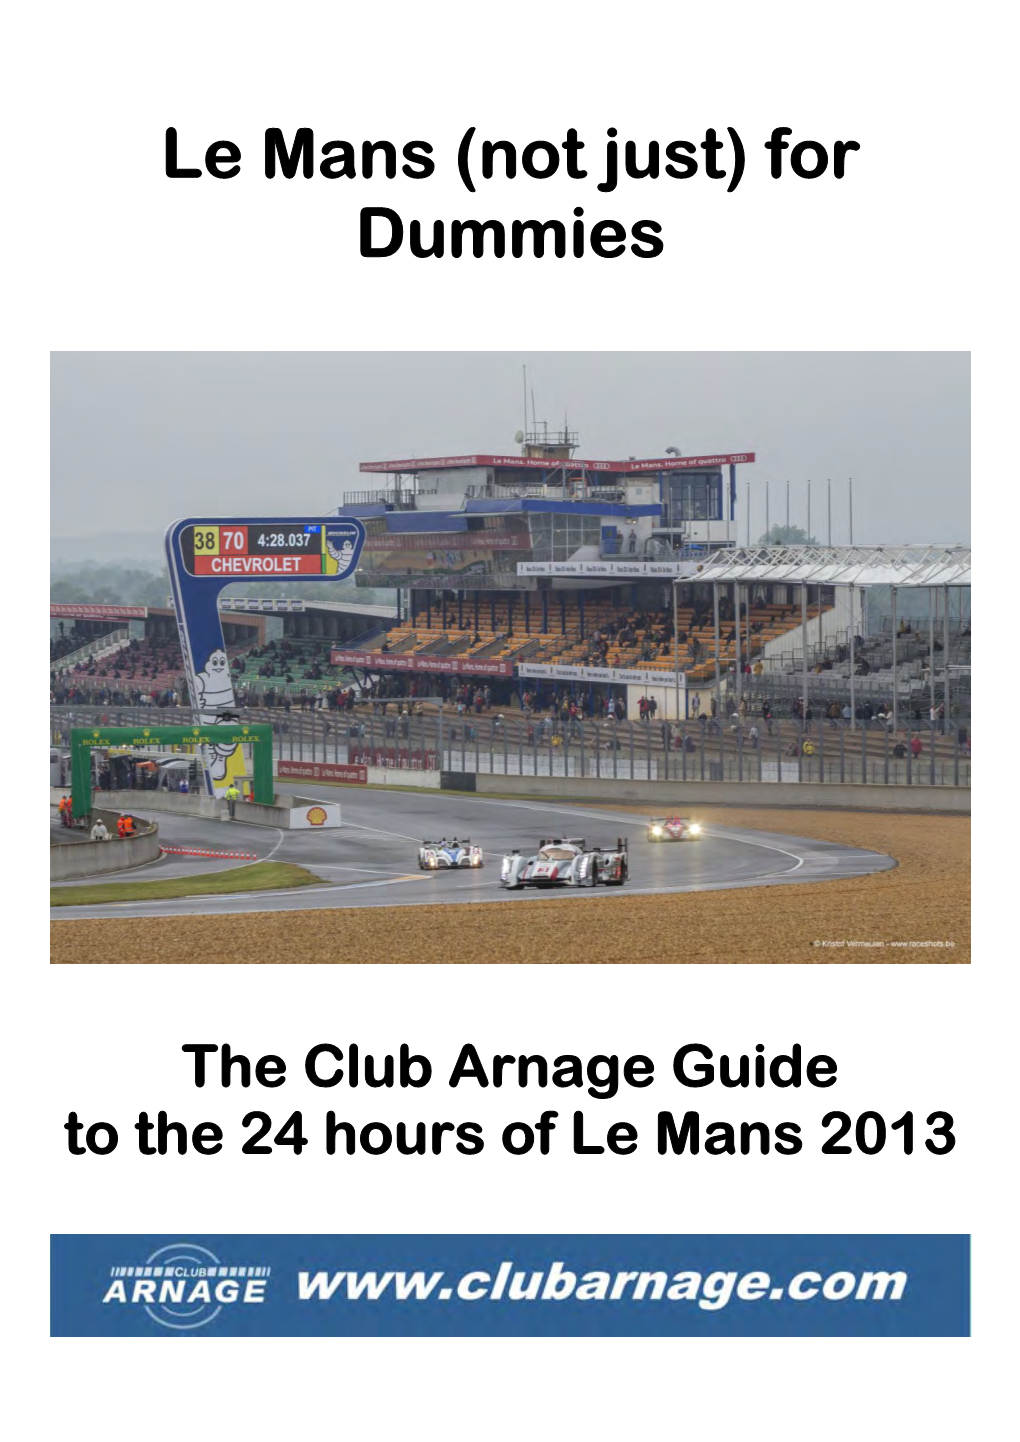 Le Mans (Not Just) for Dummies